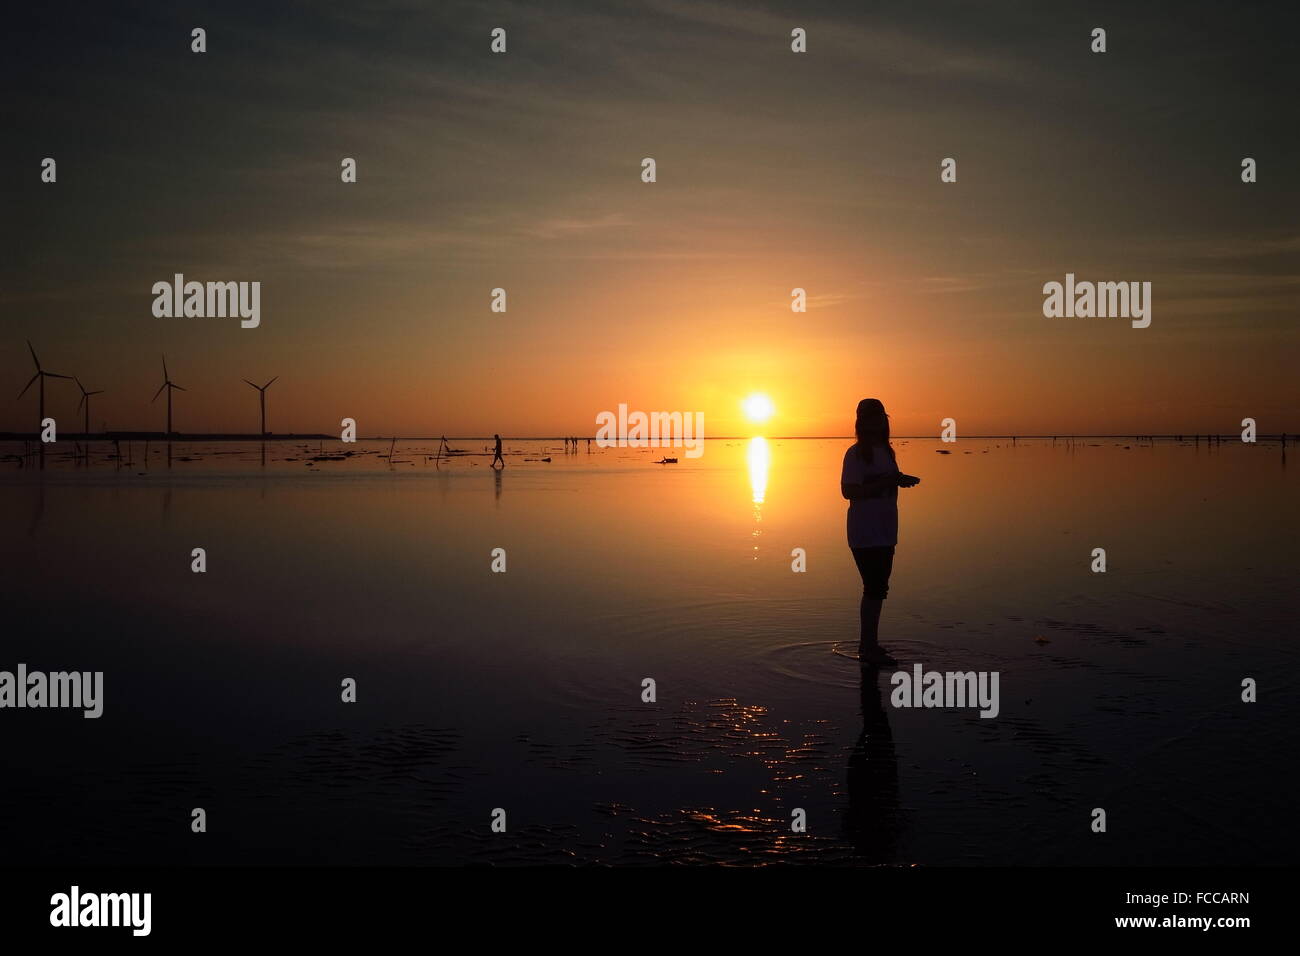 Silhouette Woman Standing On Beach at Sunset Banque D'Images